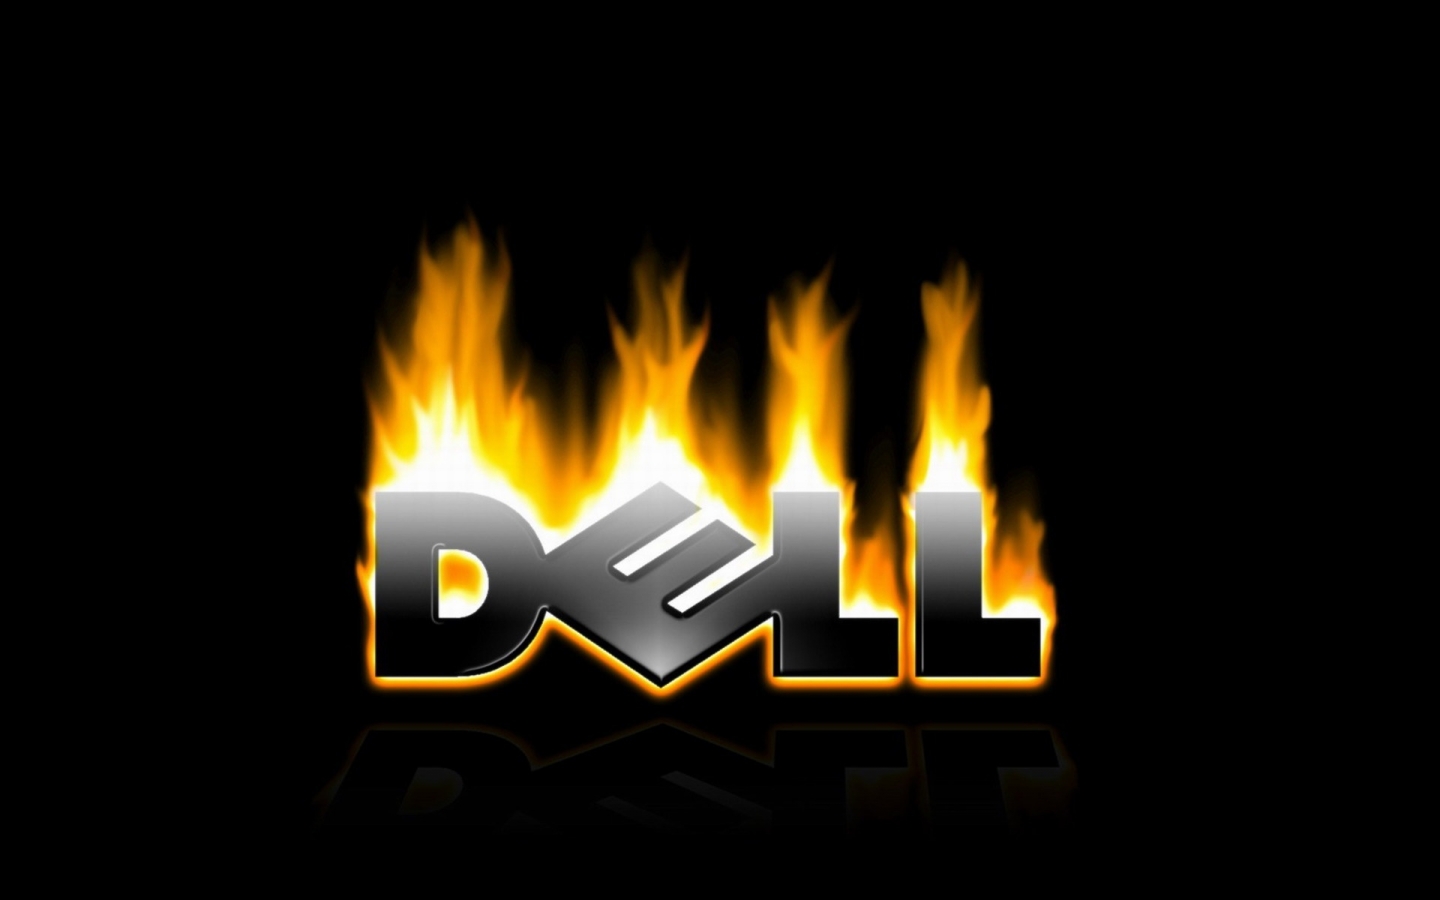 Dell in fire for 1440 x 900 widescreen resolution